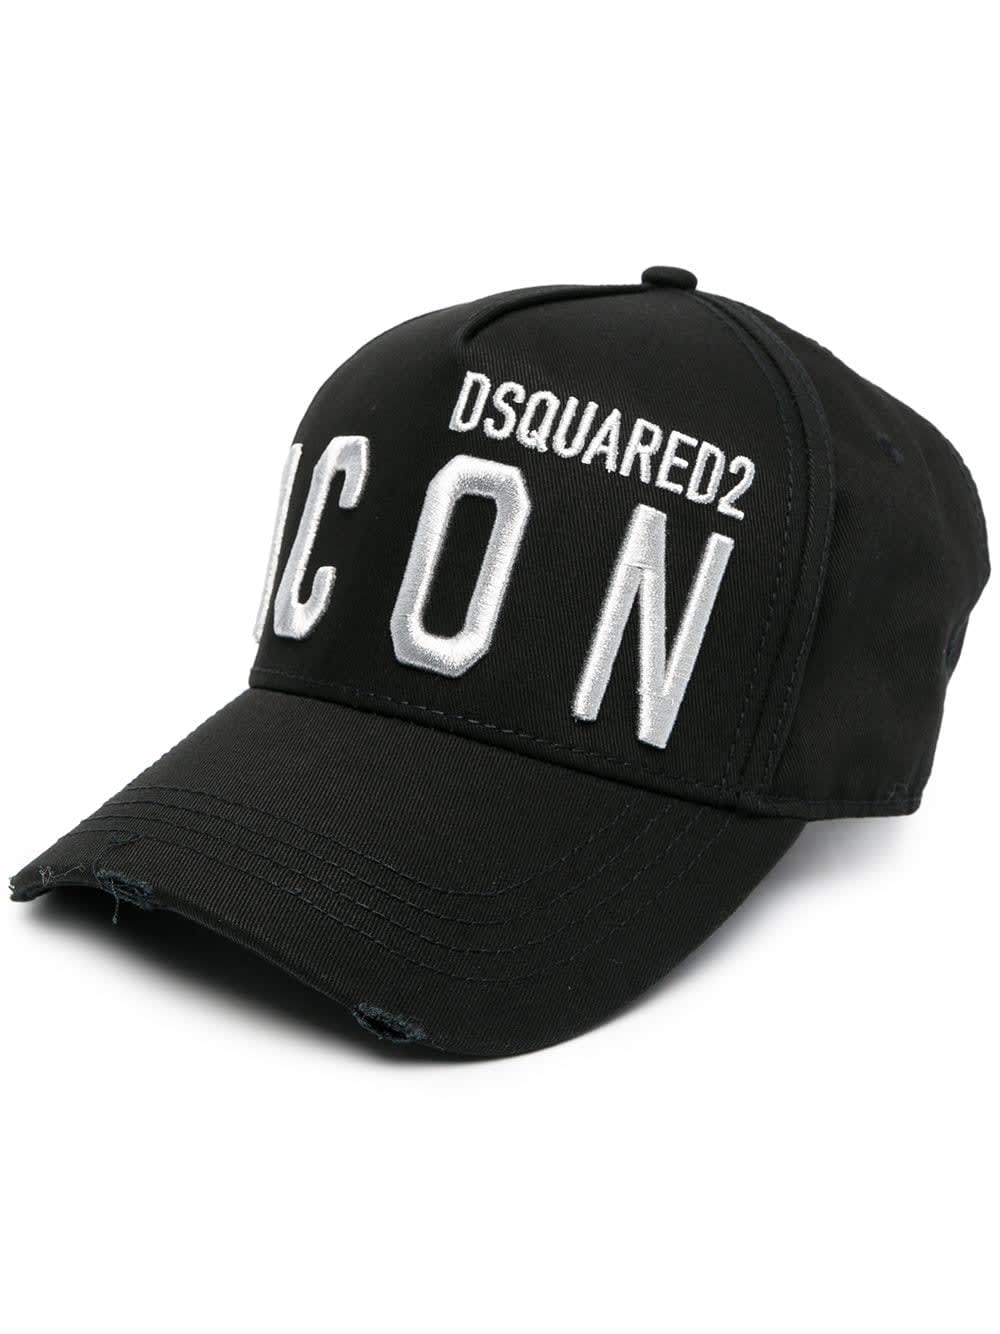 Woman Black And Silver Icon Dsquared2 Baseball Cap